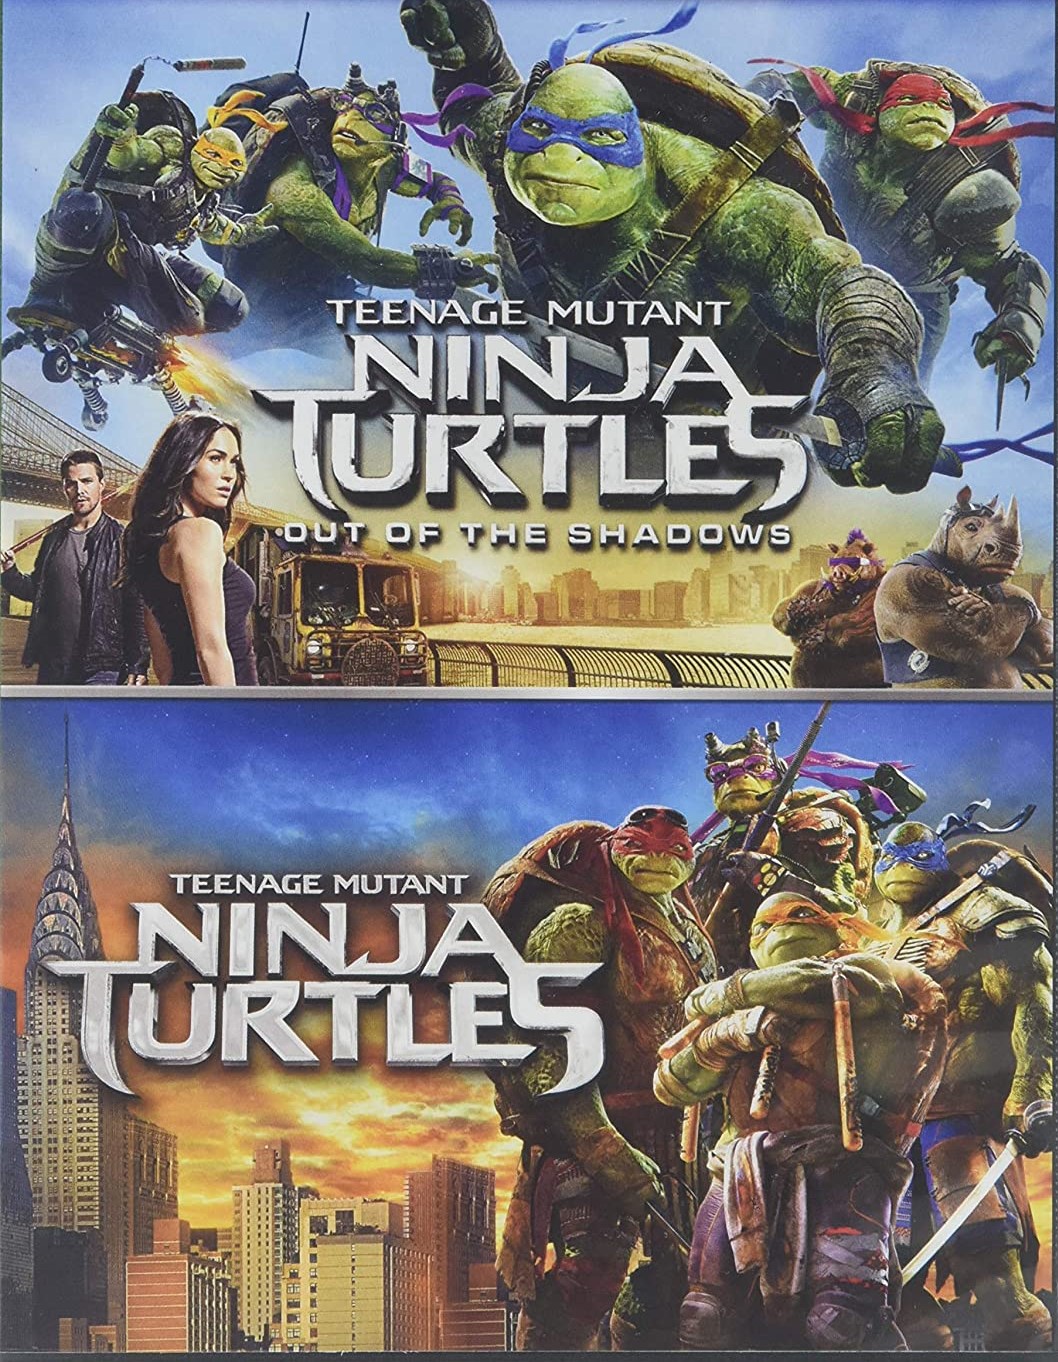 Teenage Mutant Ninja Turtles 2014 & TMNT Out of the Shadows 2016 made a fun continuity: Platinum Dunes Bay